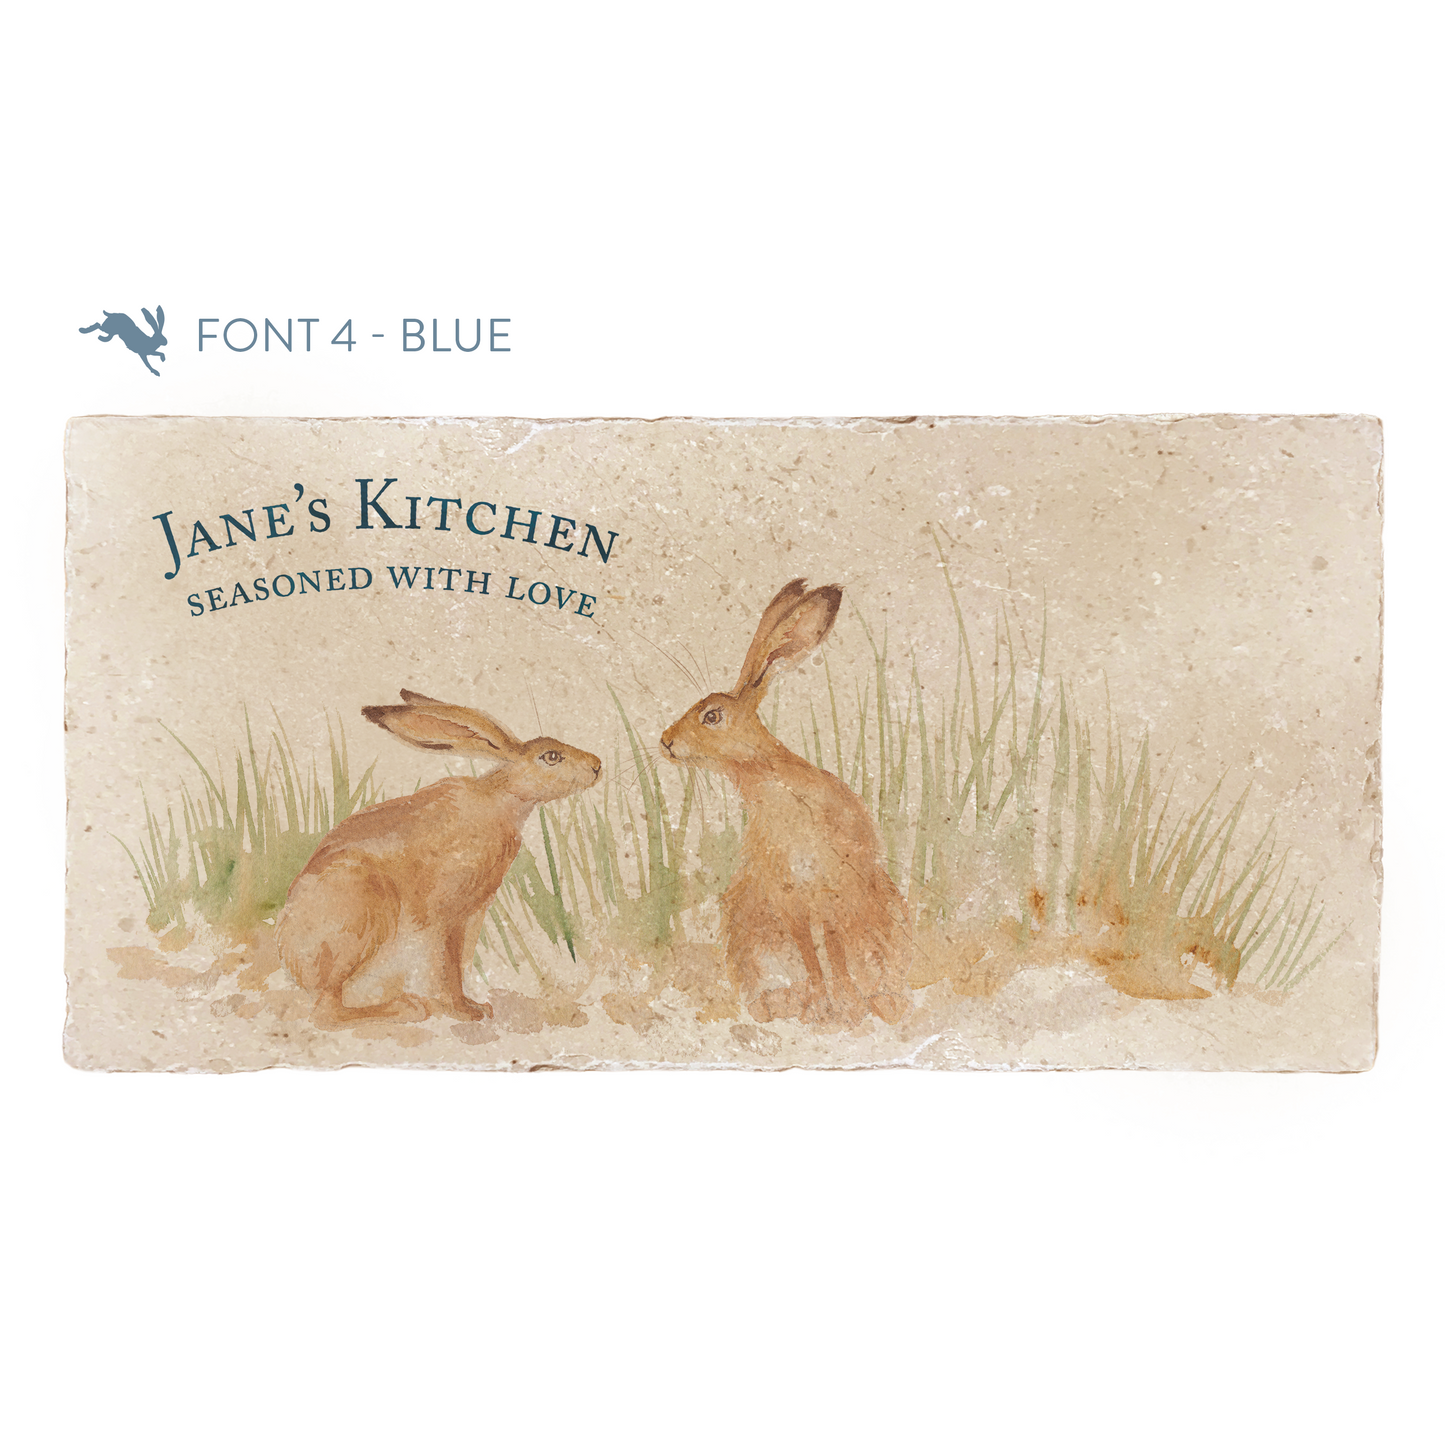 A personalised rectangular marble sharing platter featuring two kissing hares in a watercolour style. The example personalised dark blue text reads ‘Jane’s Kitchen, seasoned with love’ in a classic serif font.